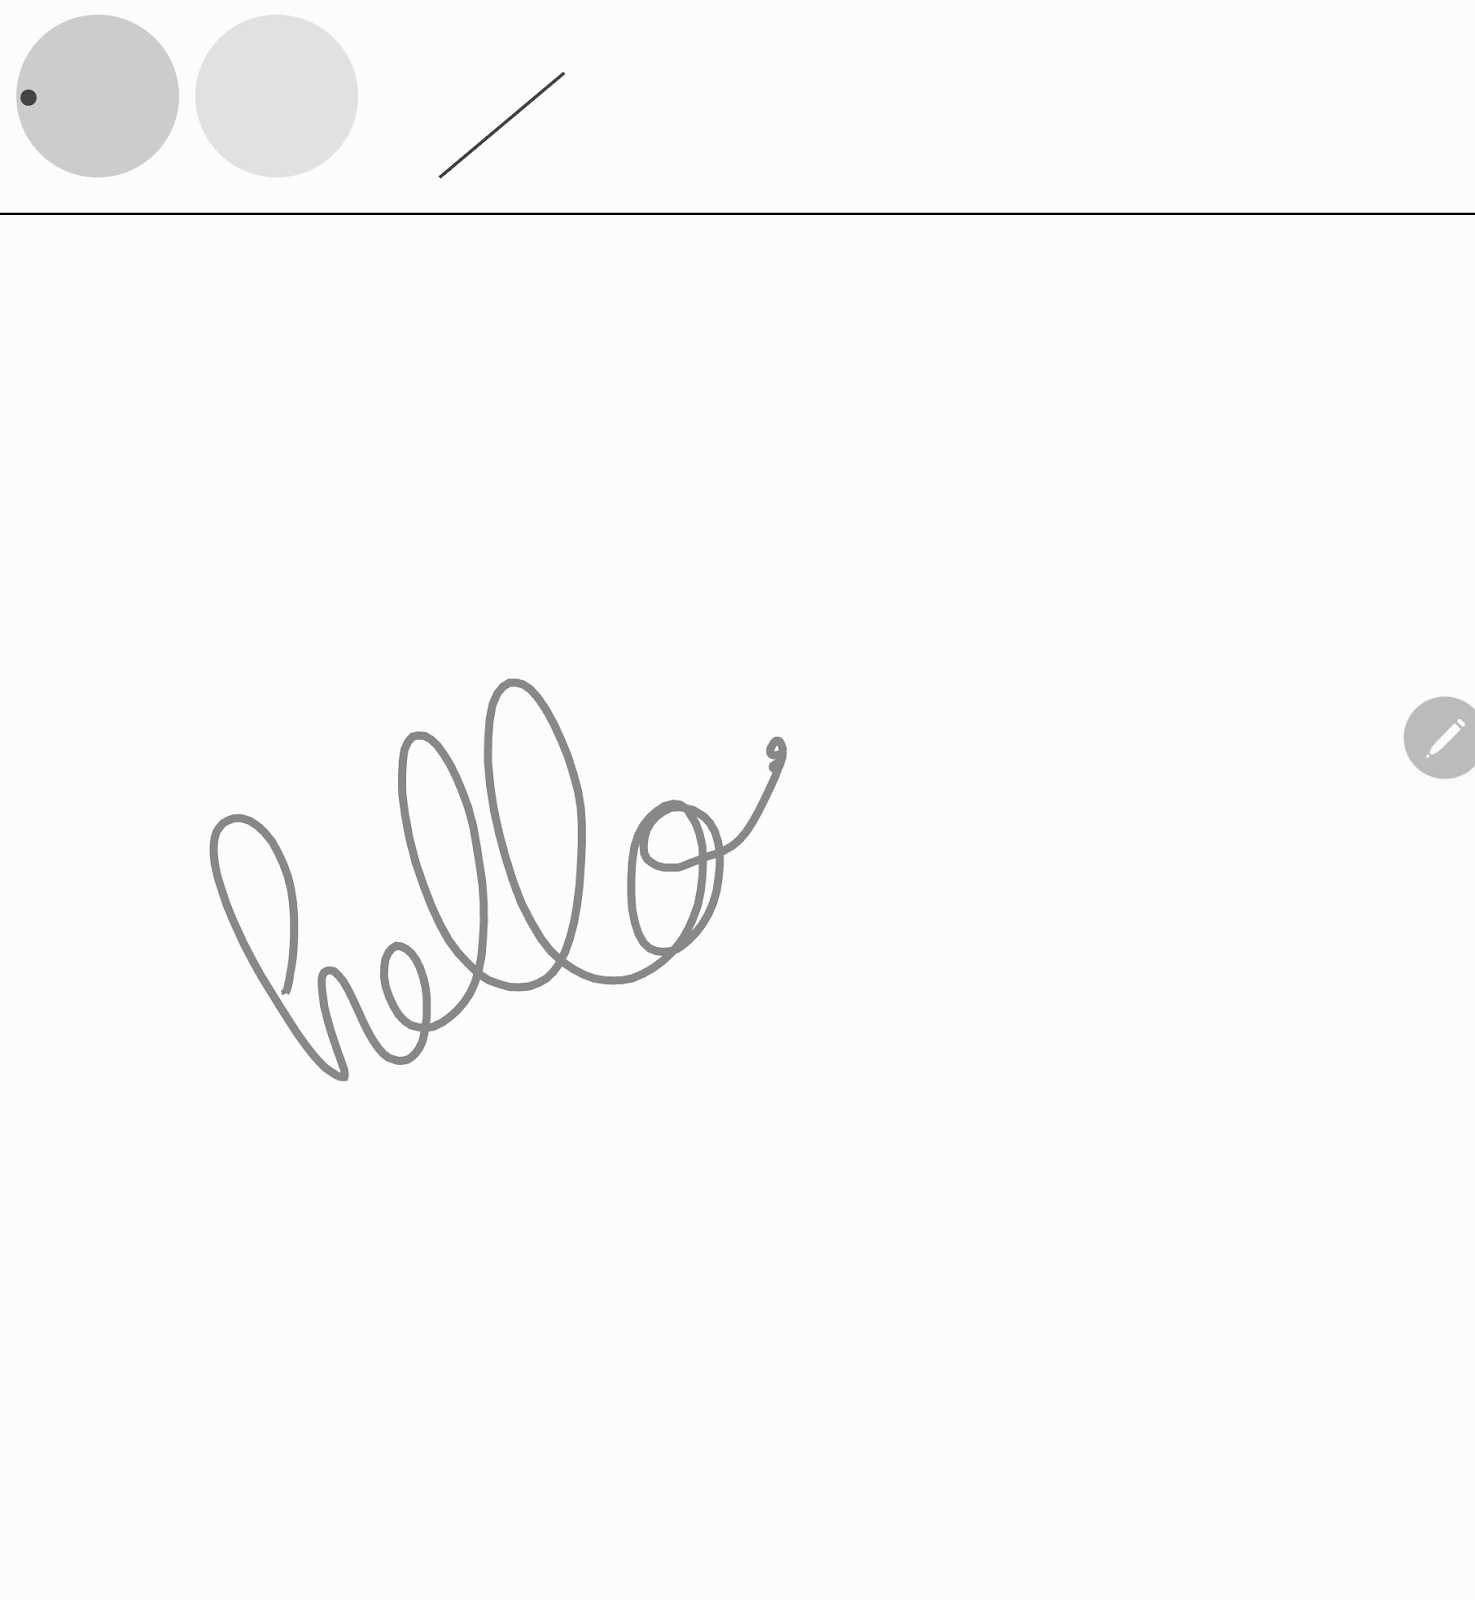 The visualized orientation, pressure, and tilt for the word 'hello' written with a stylus